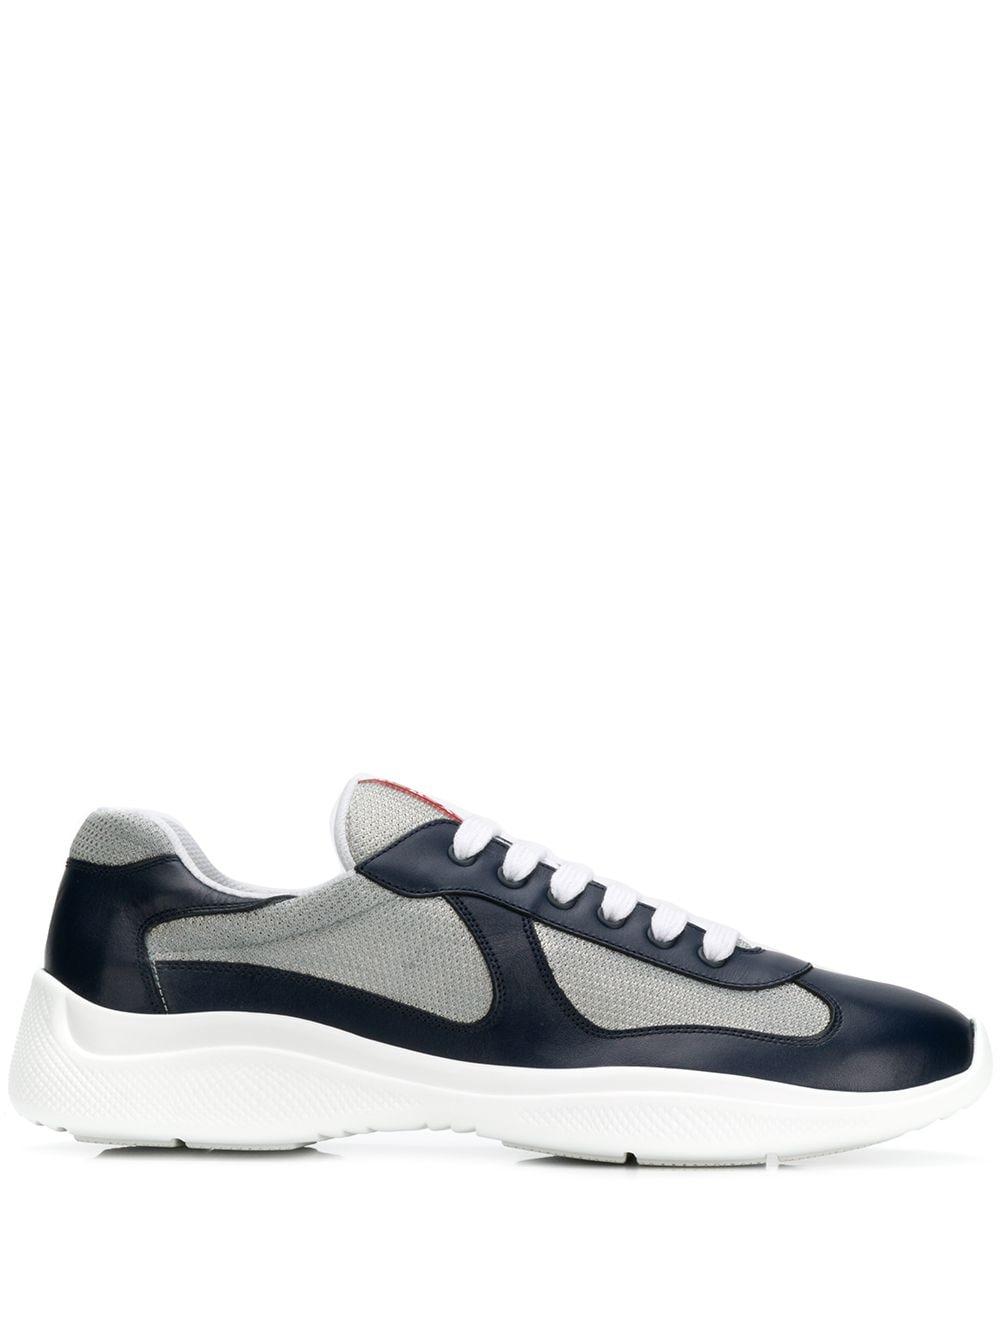 Prada Leather Americas Cup Sneakers in Blue,White,Silver (Blue) for Men ...